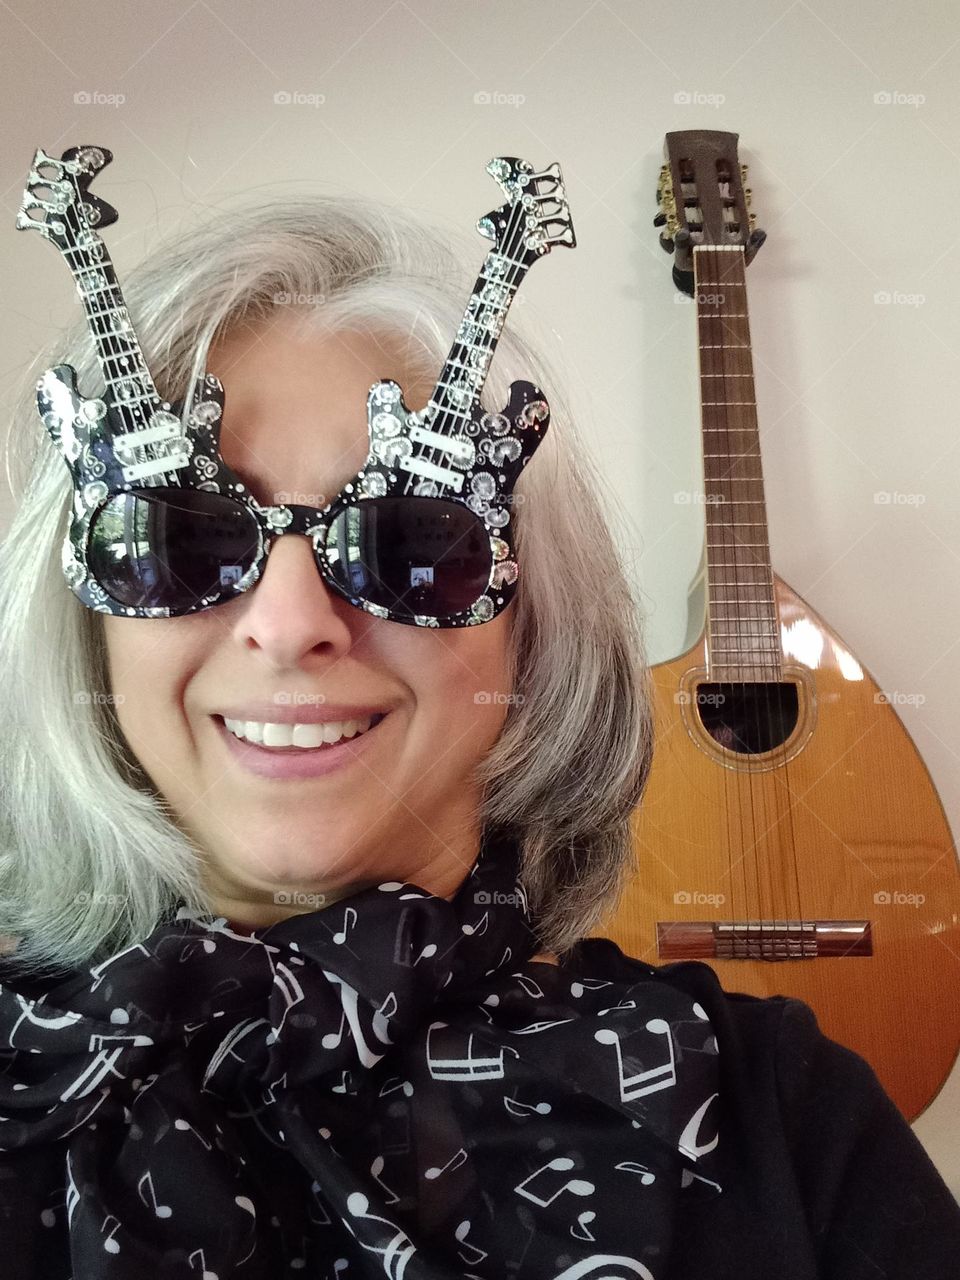 Ready to rock with  guitar sunglasses on and my beautiful Craviola guitar in background